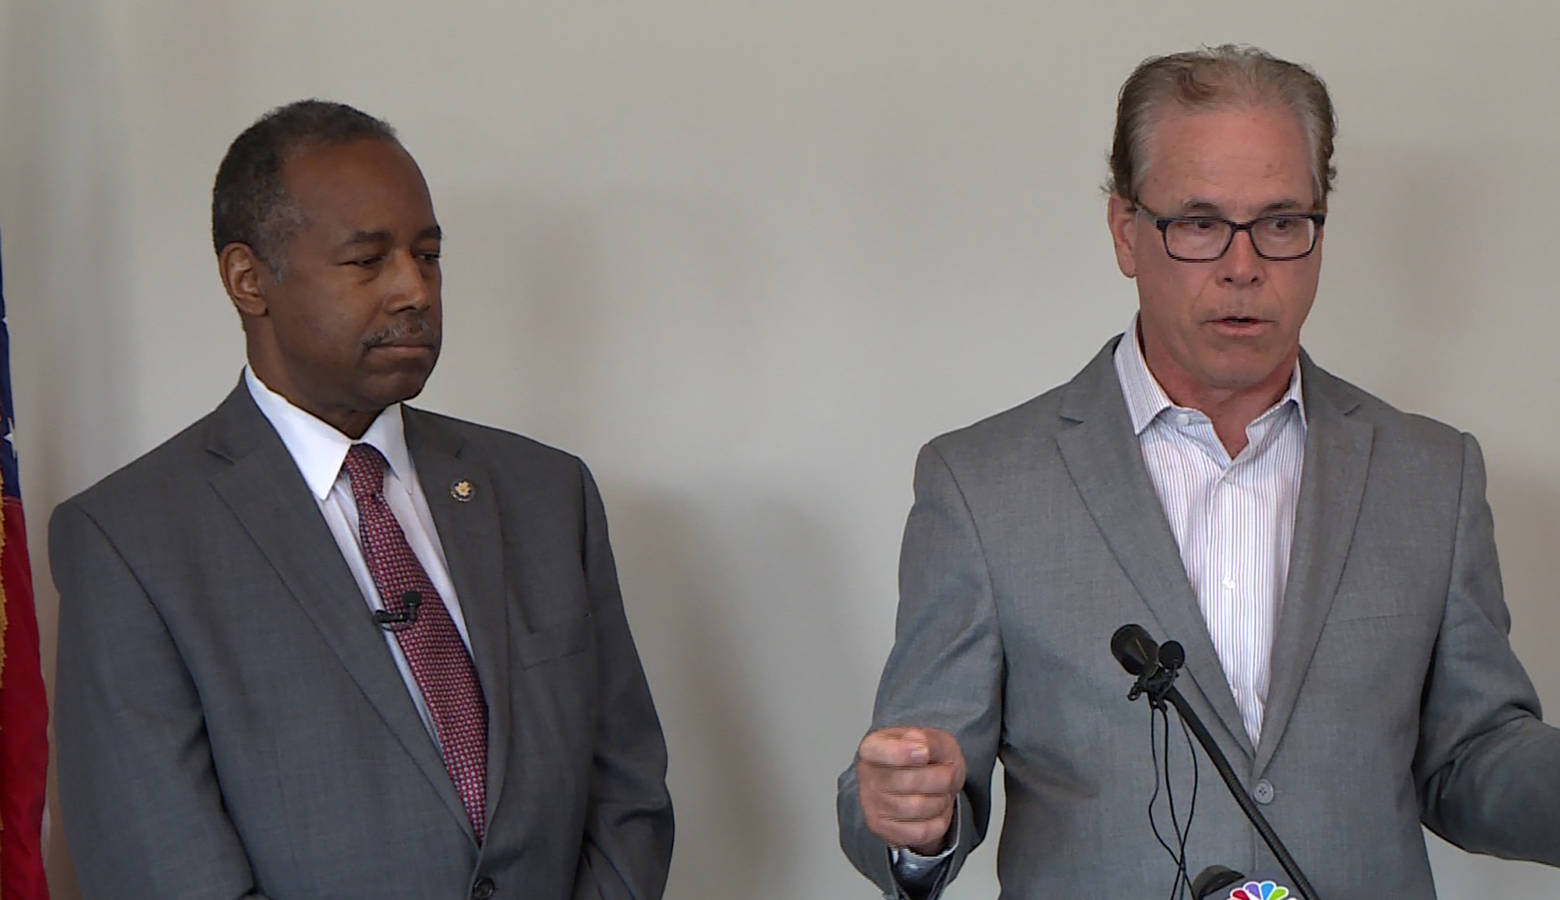 HUD Secretary Ben Carson, left, and Sen. Mike Braun (R-Ind.) discuss opportunity zones in Indianapolis. (WTIU)